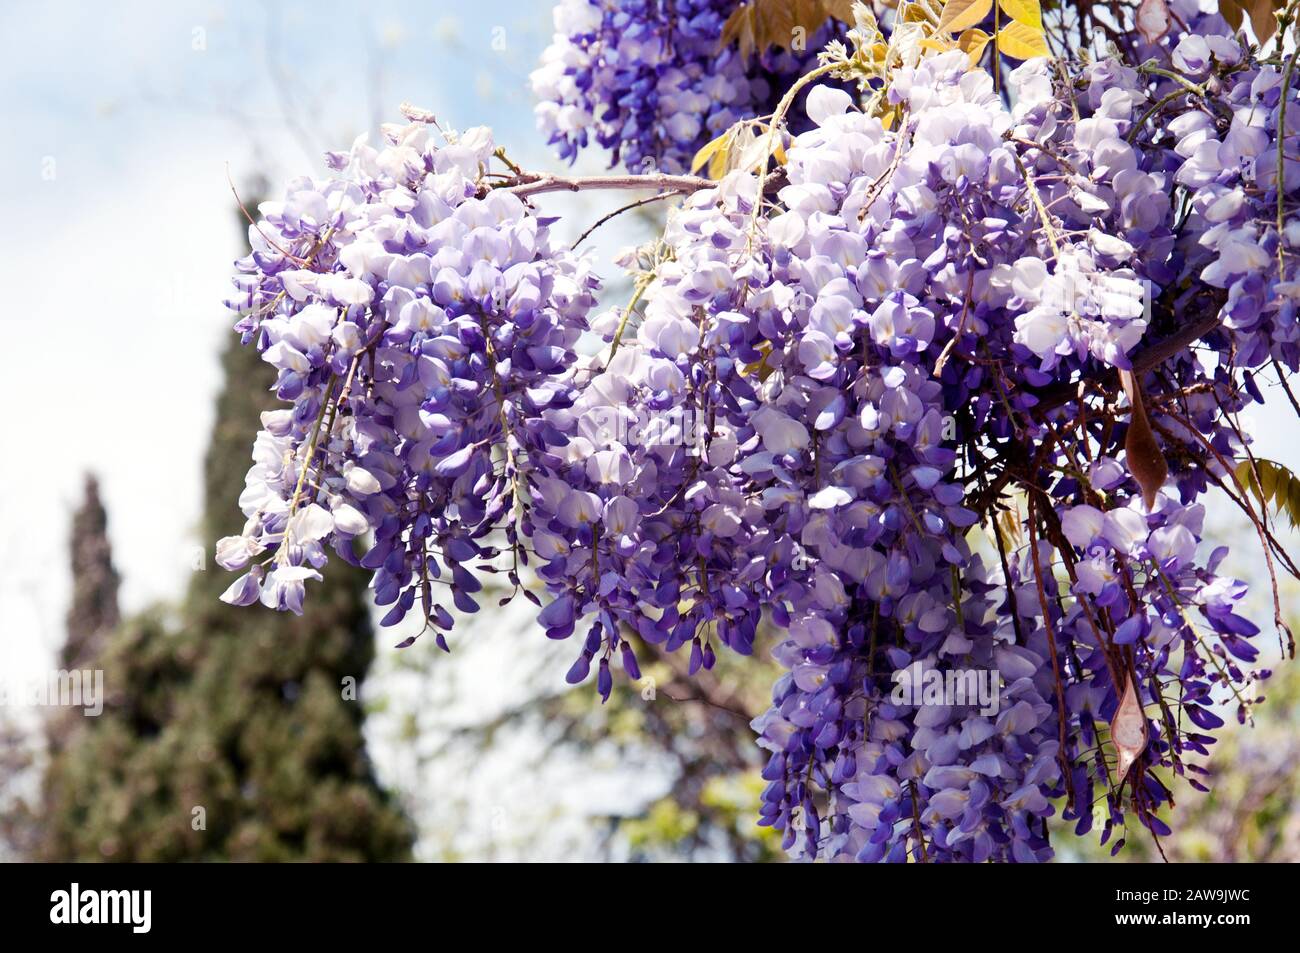 Lush flowering wisteria in the spring garden. Purple wisteria flowers in green leaves. Stock Photo